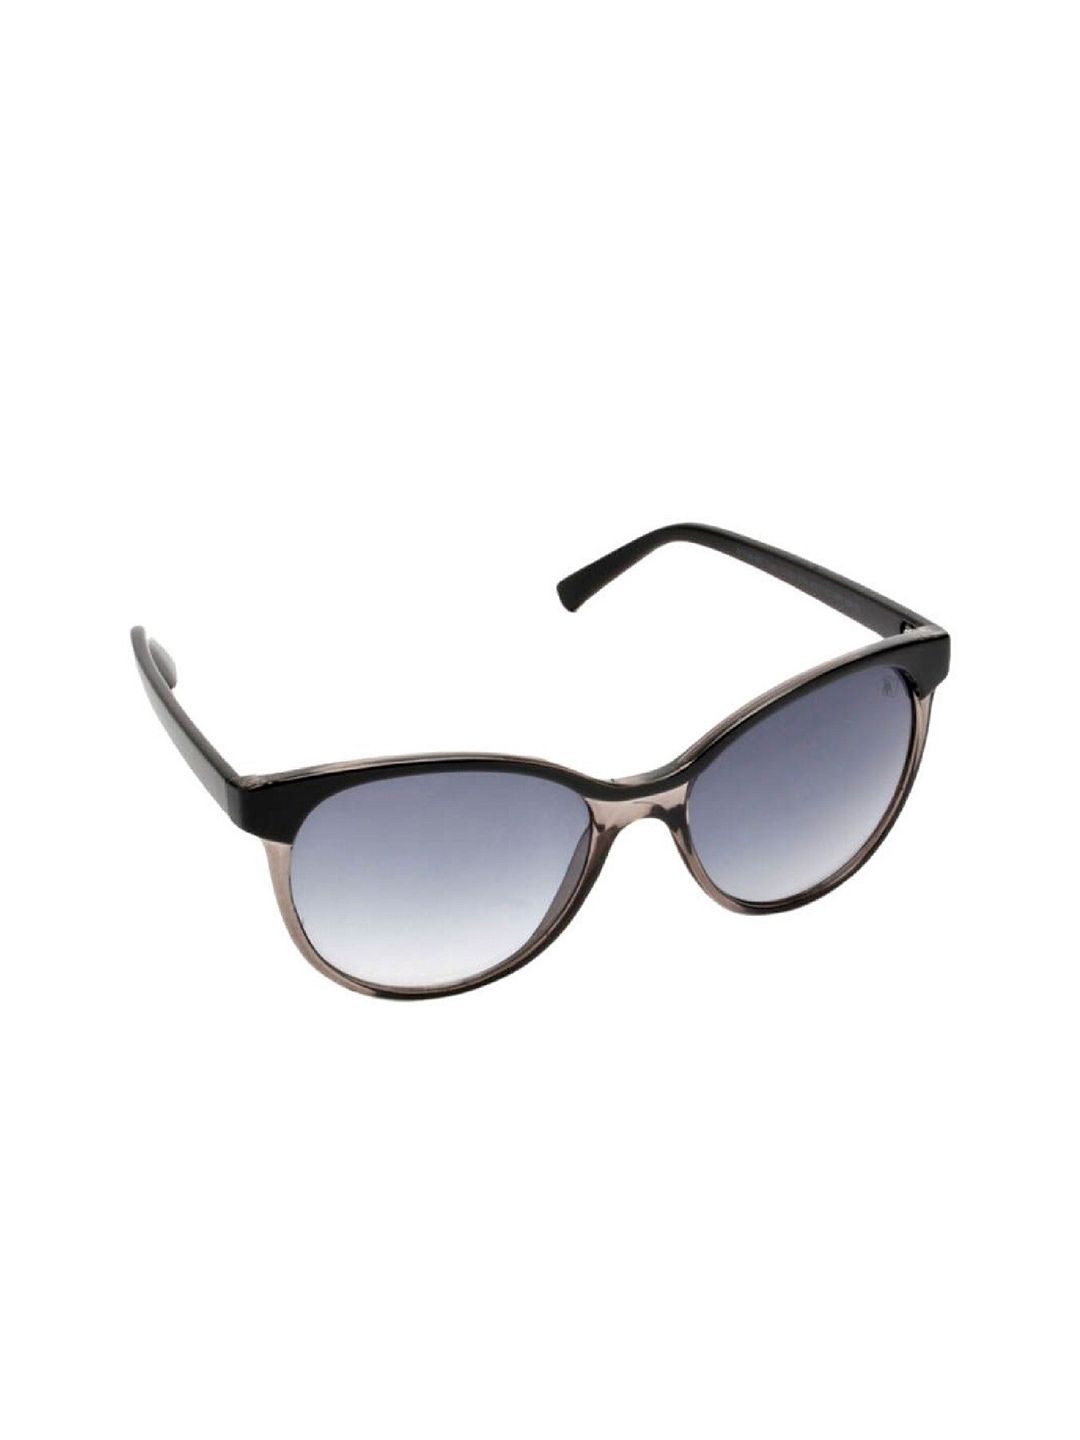 MTV Unisex Green Lens & Black Cateye Sunglasses with UV Protected Lens Price in India